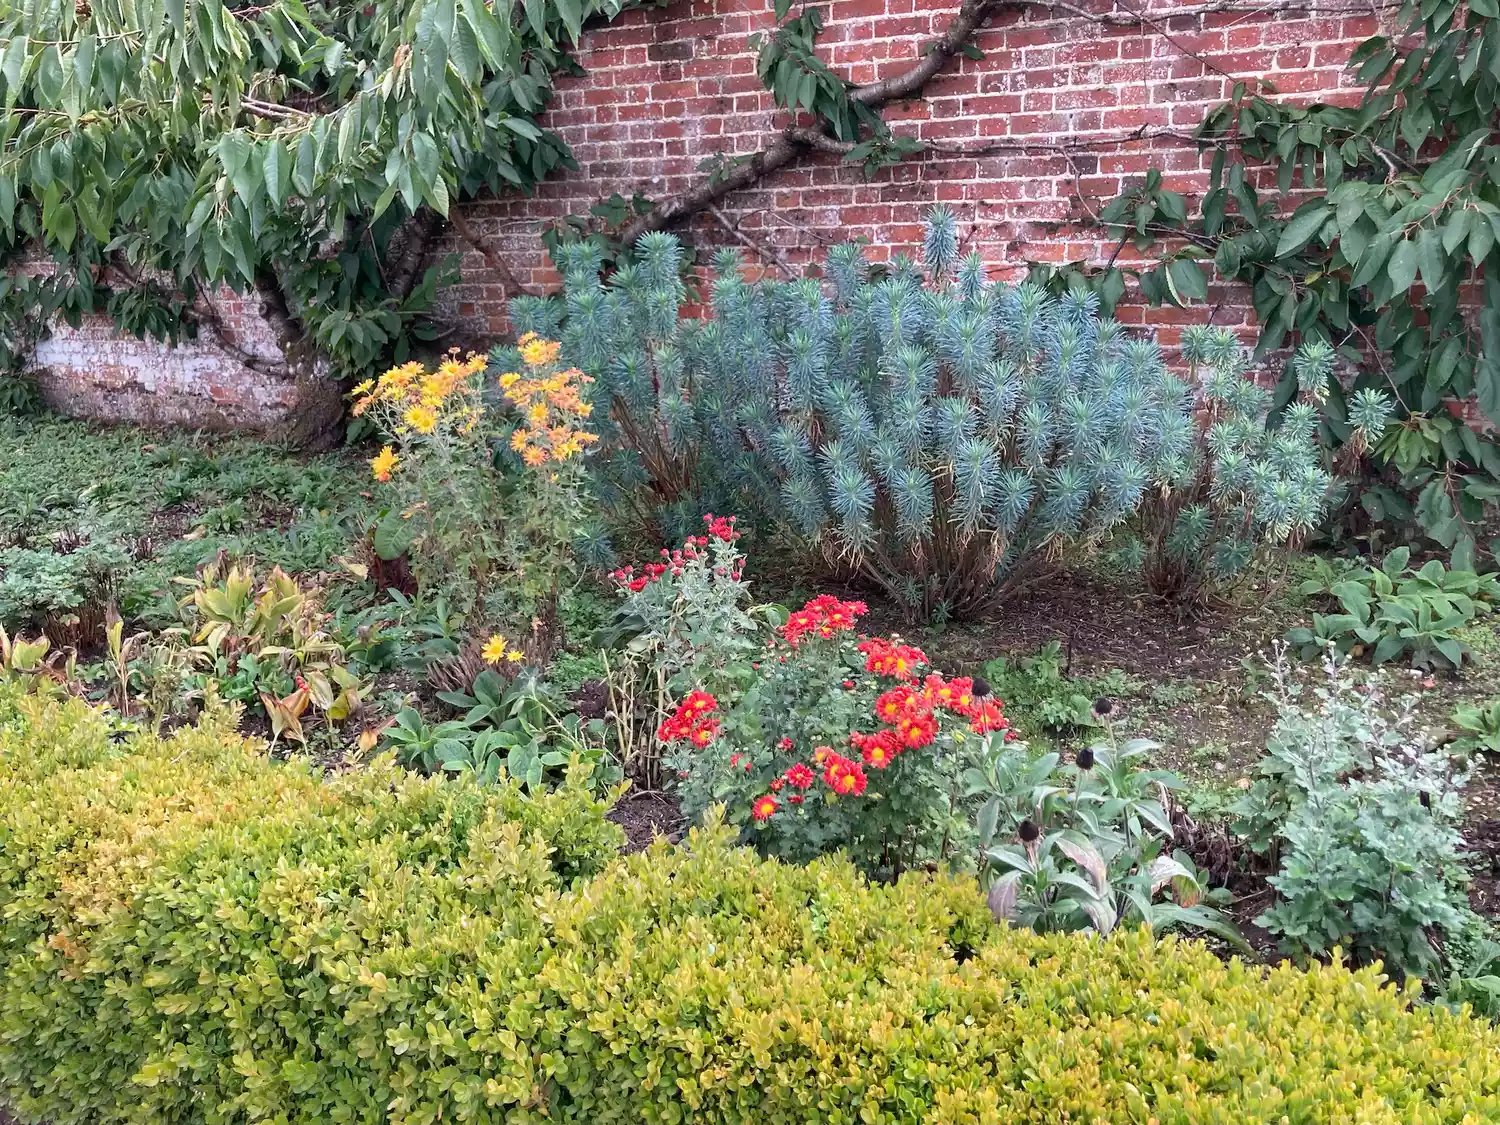 Herbaceous border with low boxwood hedge in front and brick wall behind, with red and yellow mums